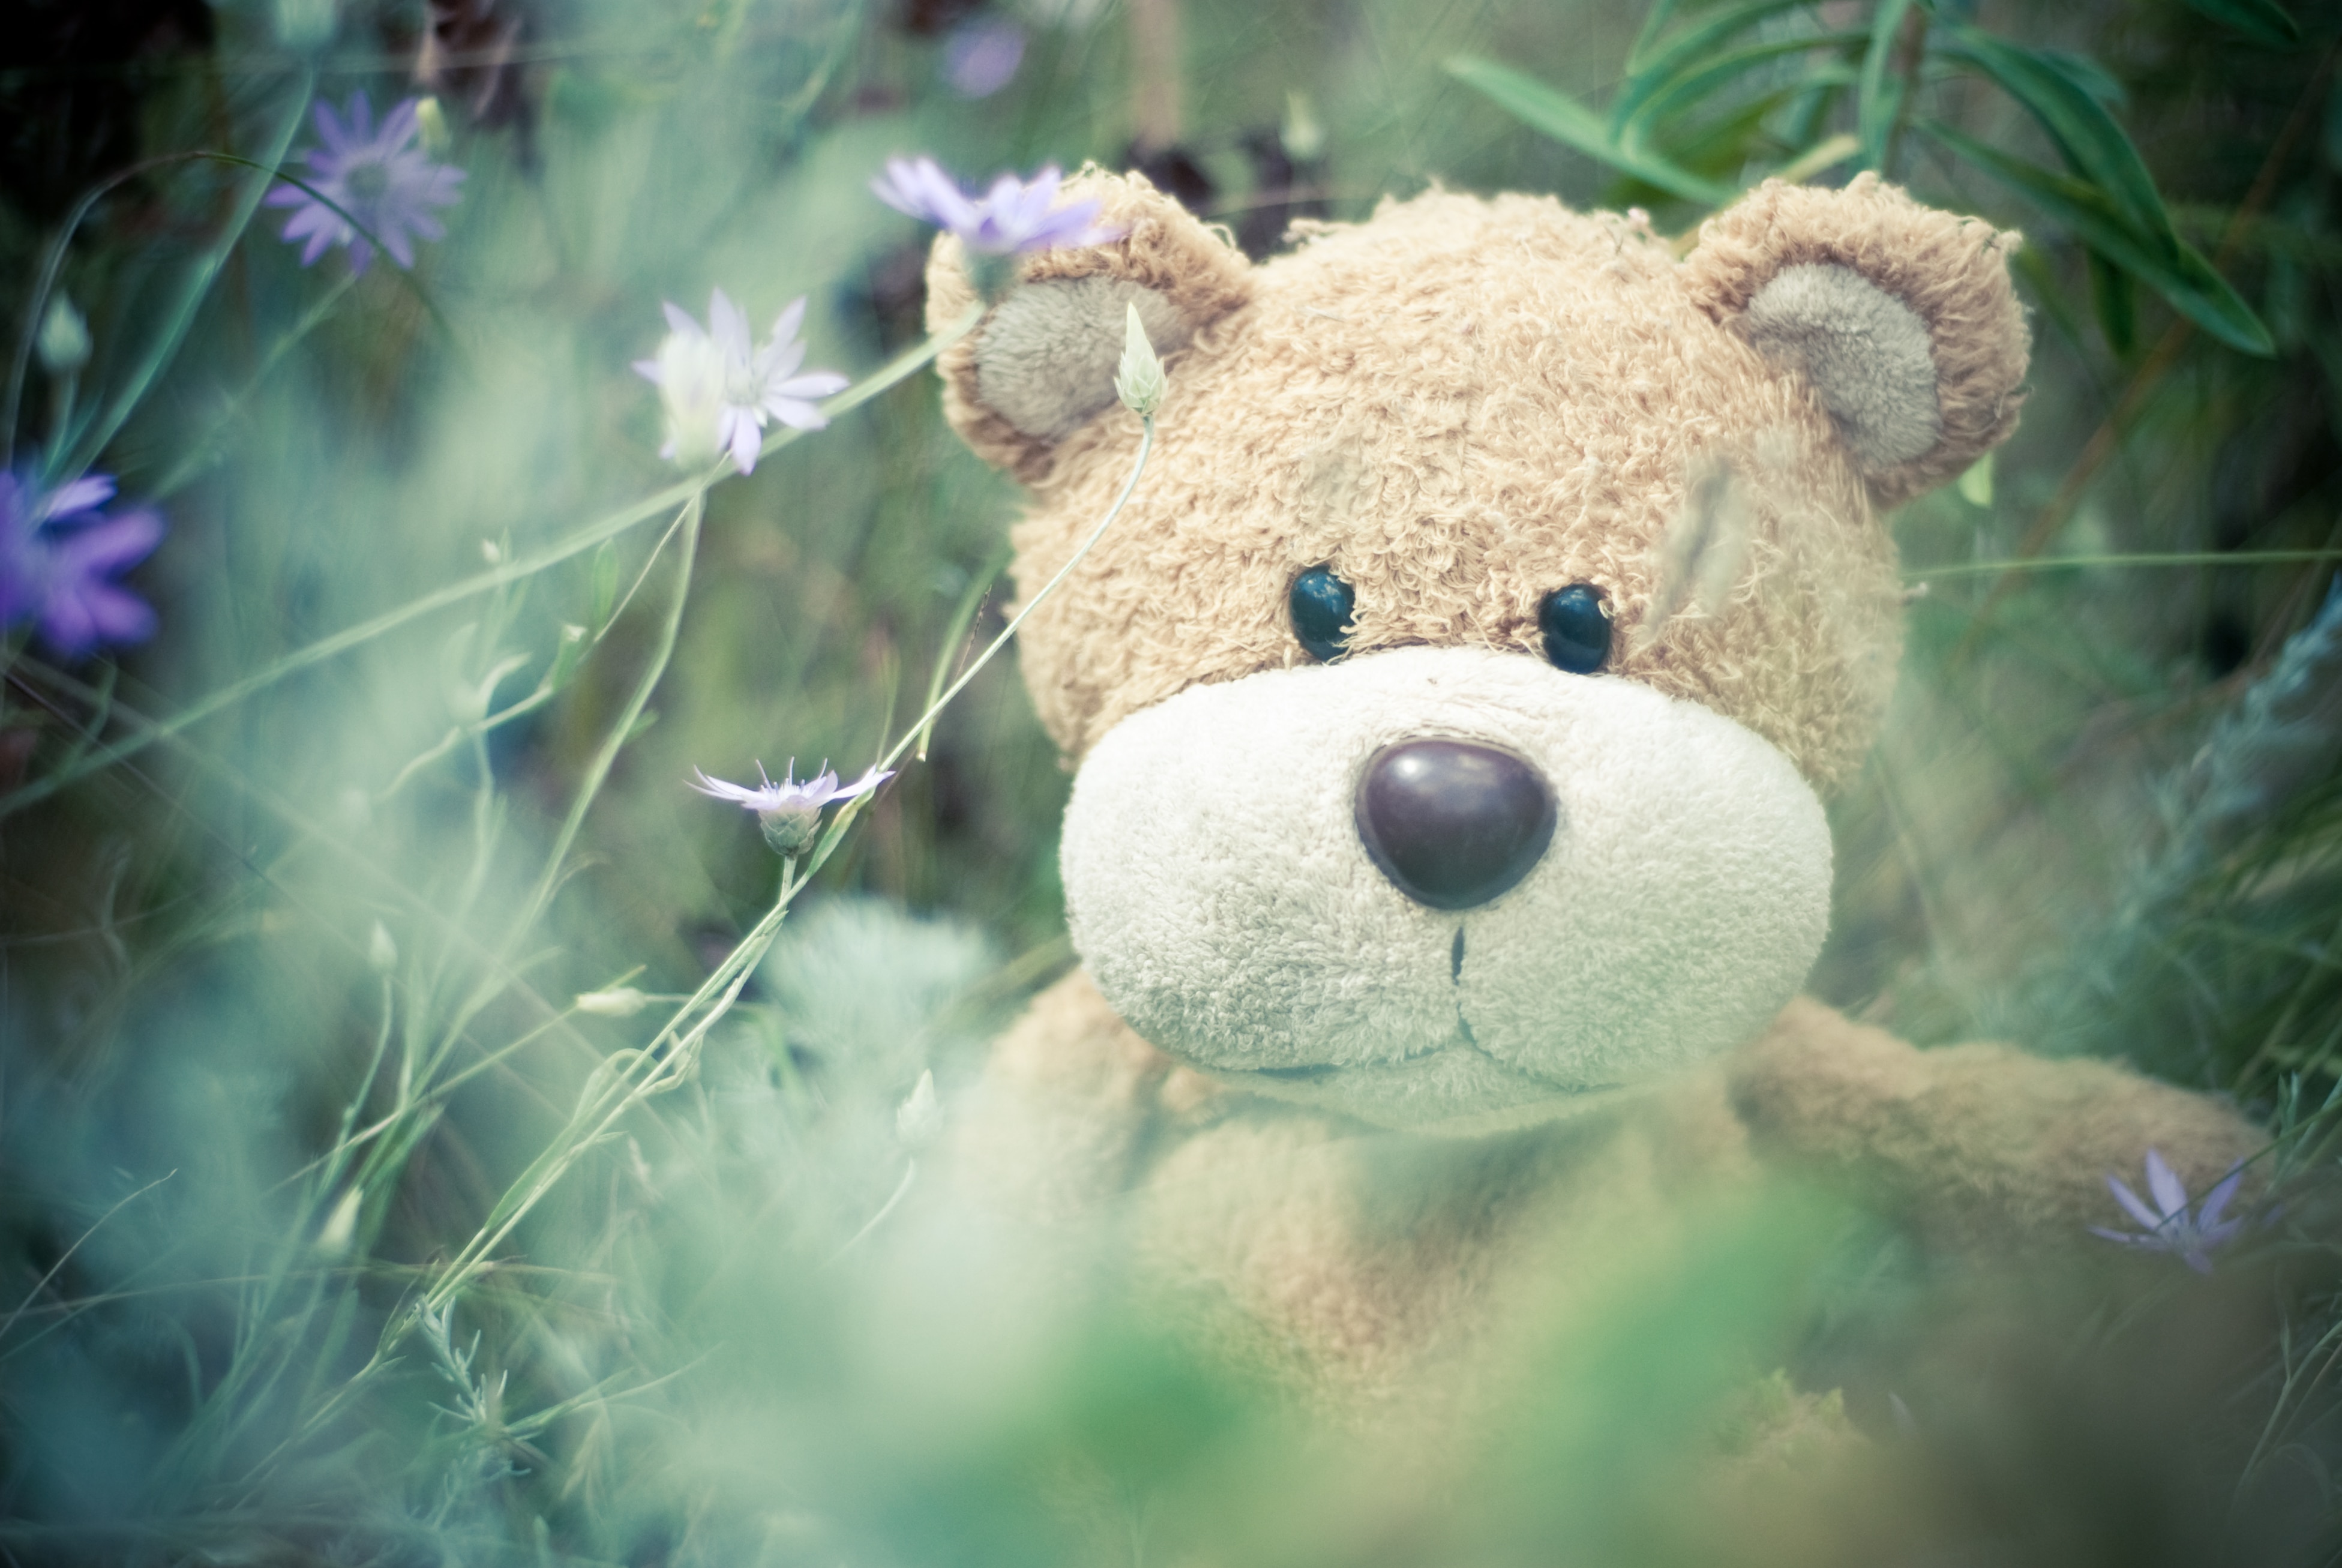 closeup photo of brown and white teddy bear surrounded by green leaf plants